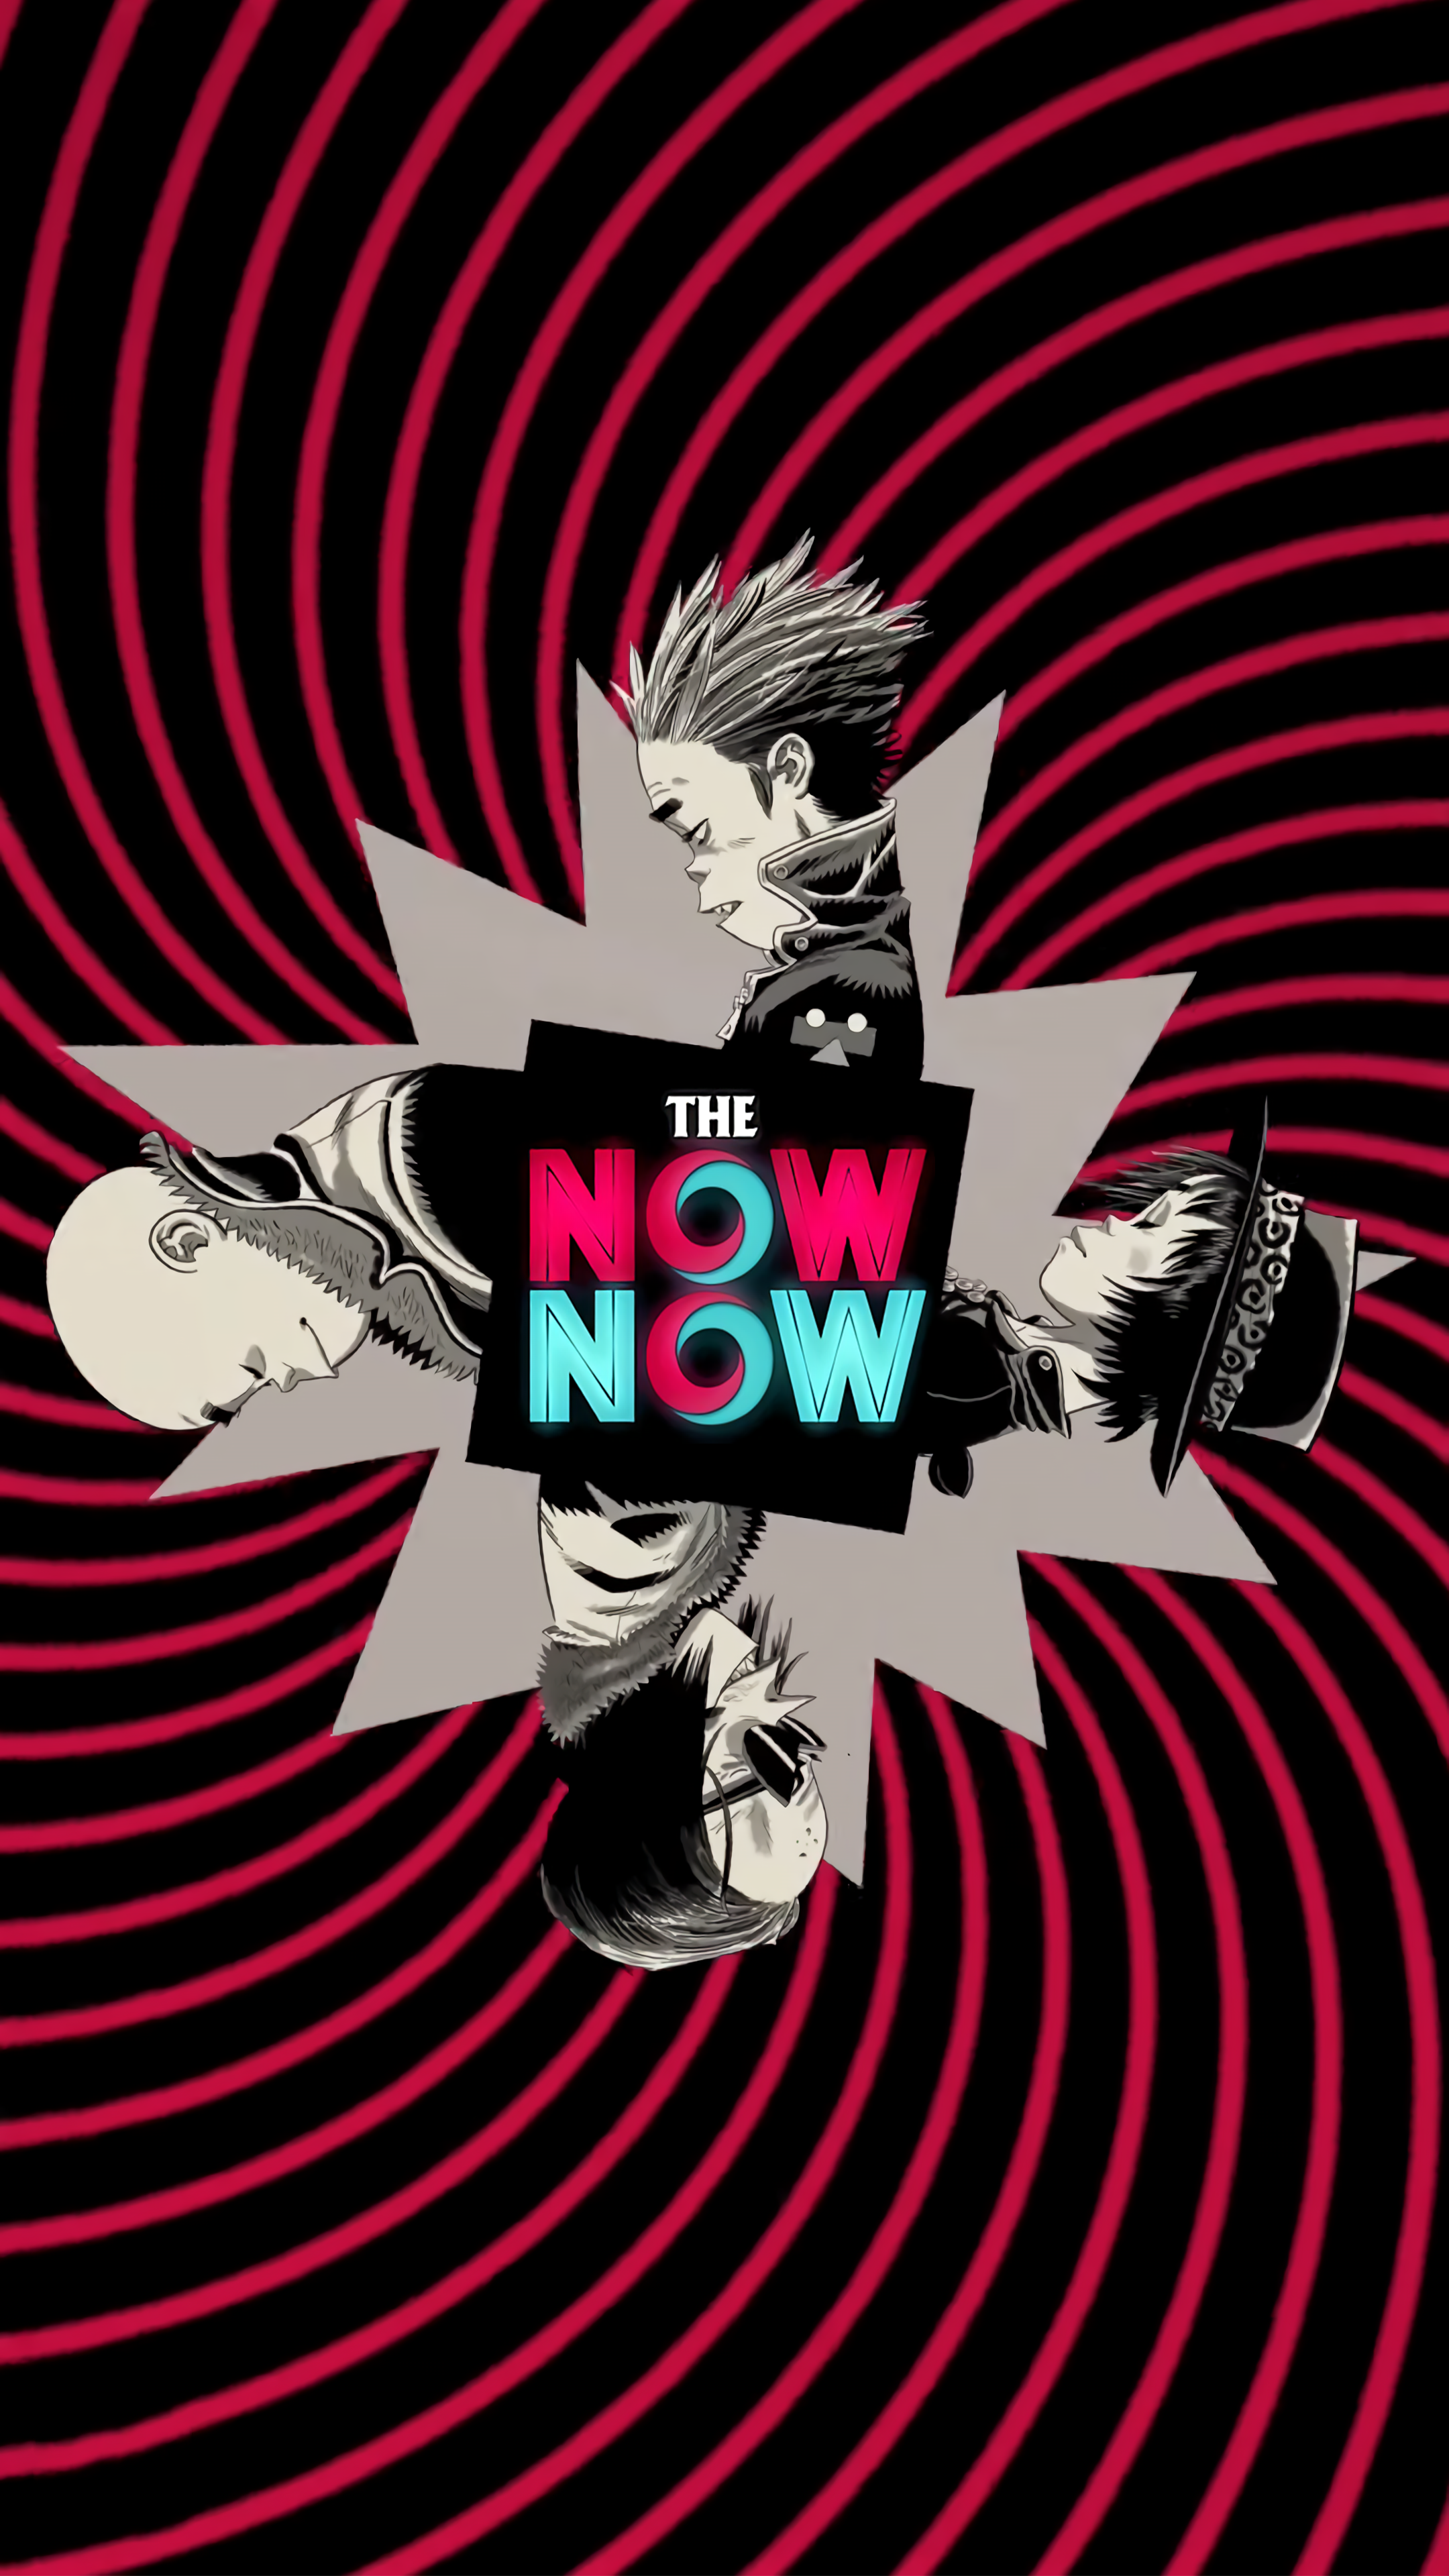 The Now Now Visualizer Phone Wallpaper. Gorillaz art, Gorillaz, Phone wallpaper